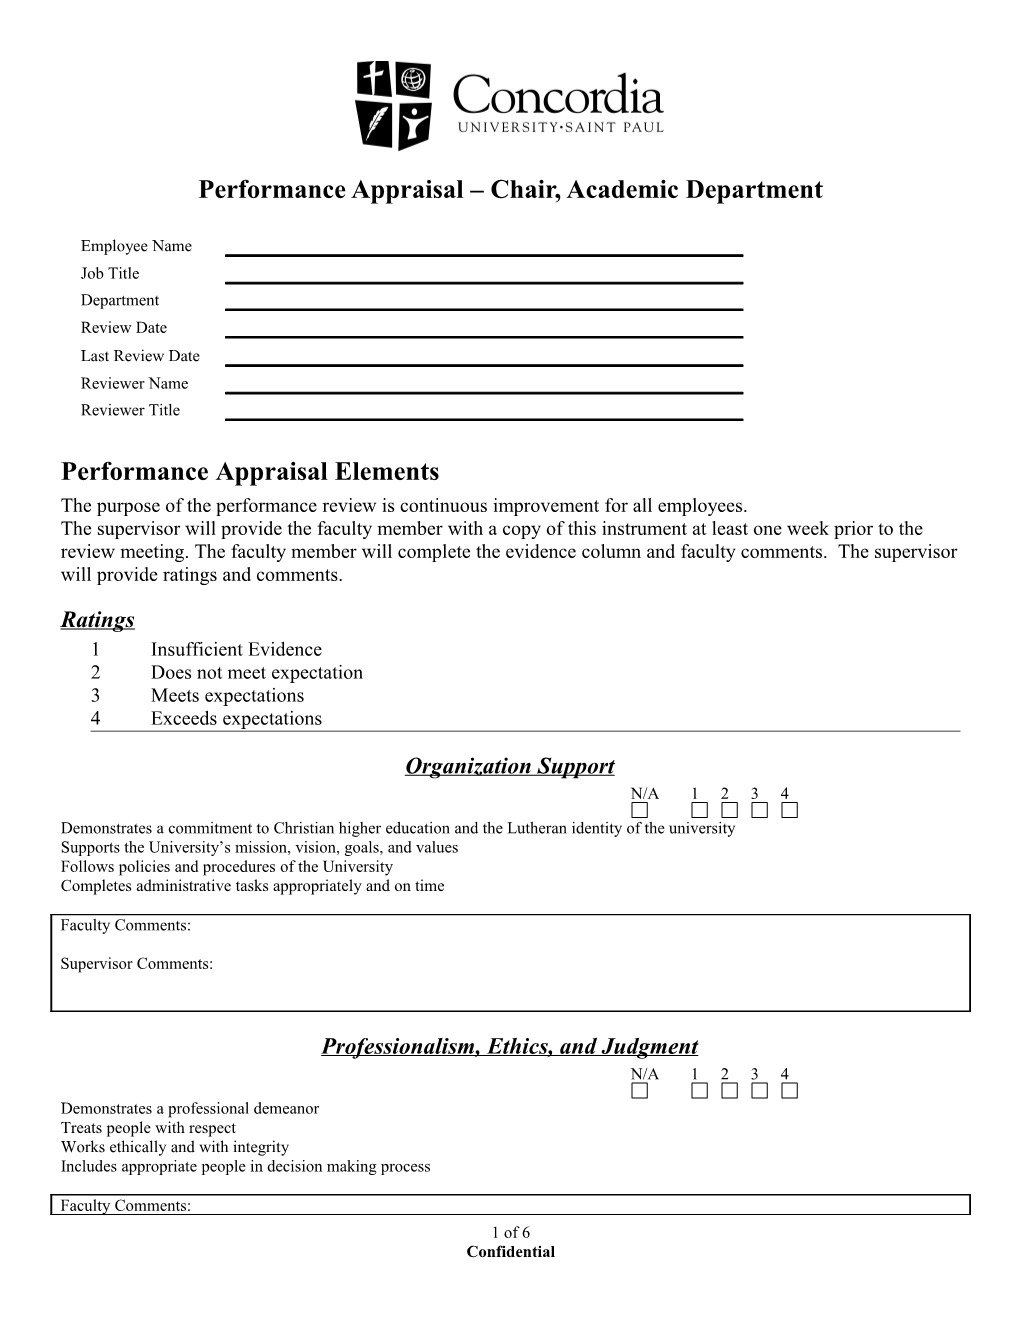 Employee Performace Review - Department